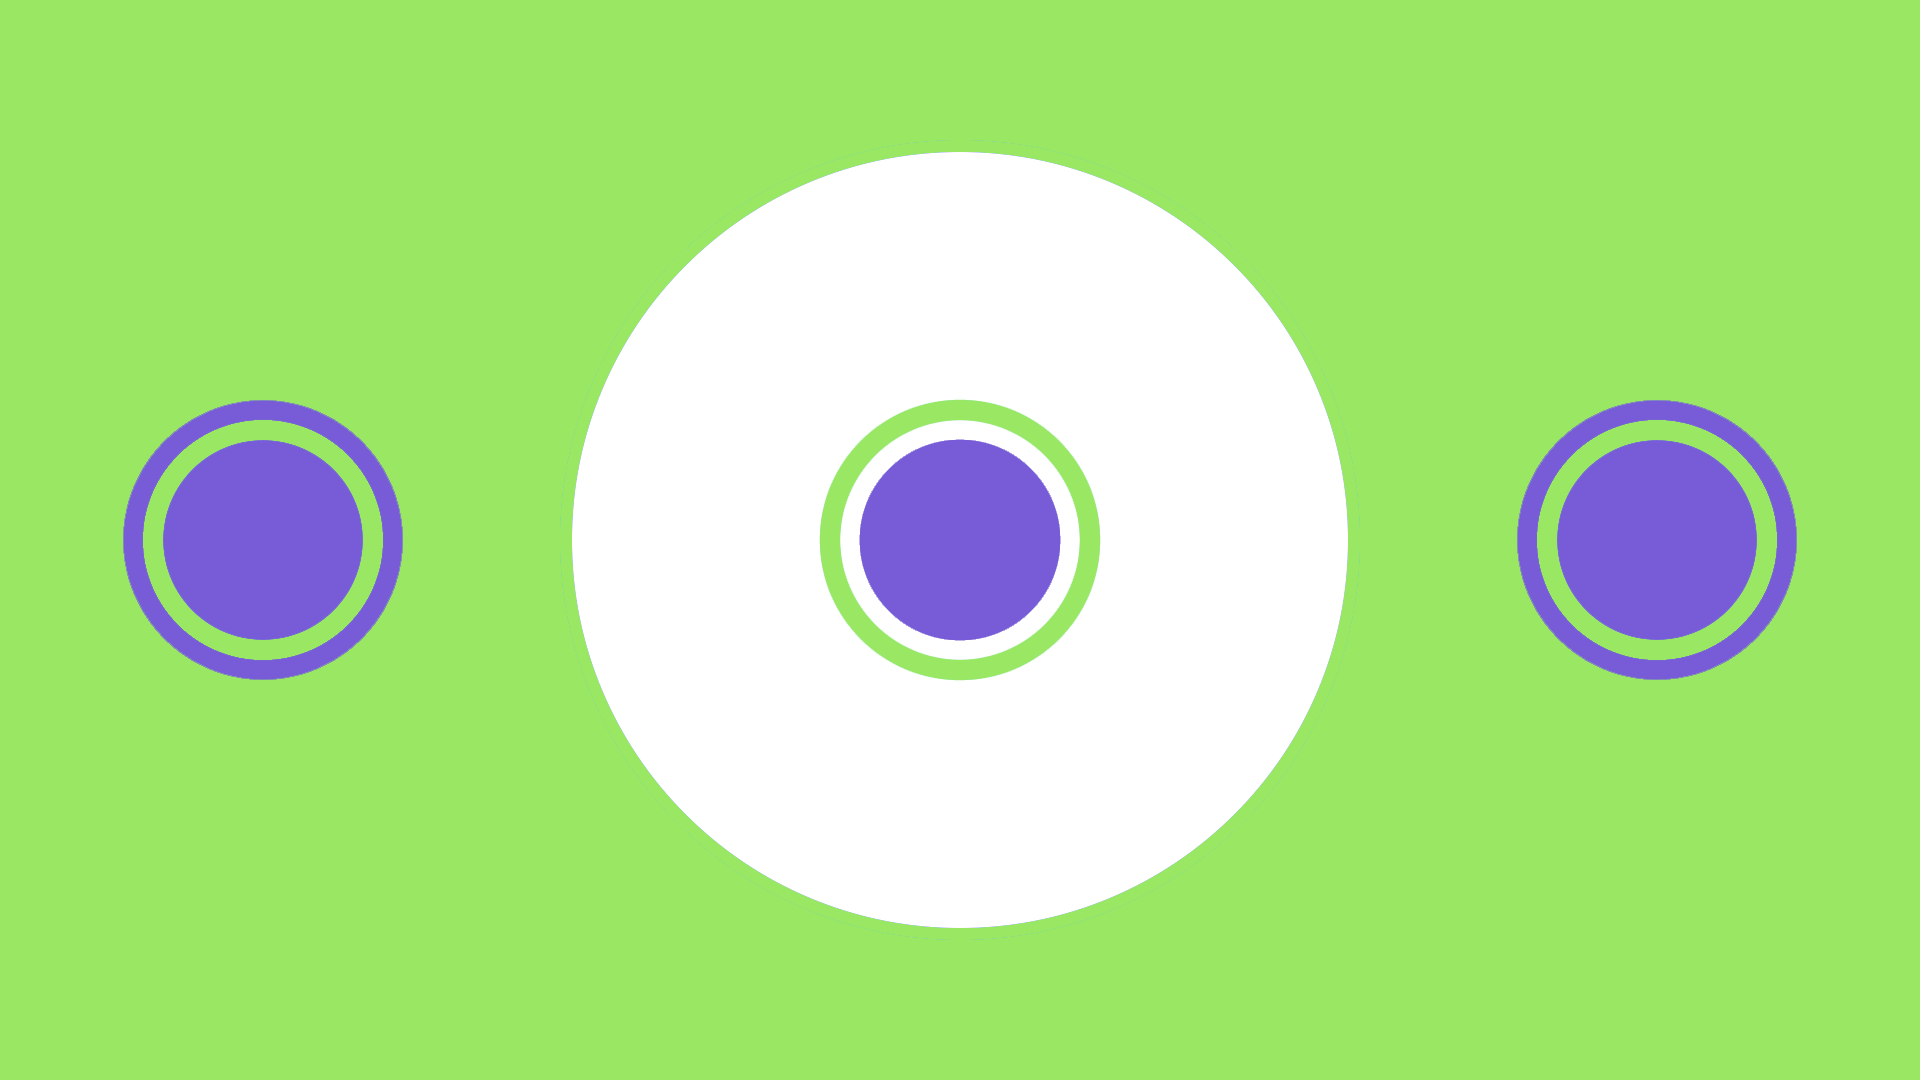 General 1920x1080 colorful Hypnosis green background minimalism simple background